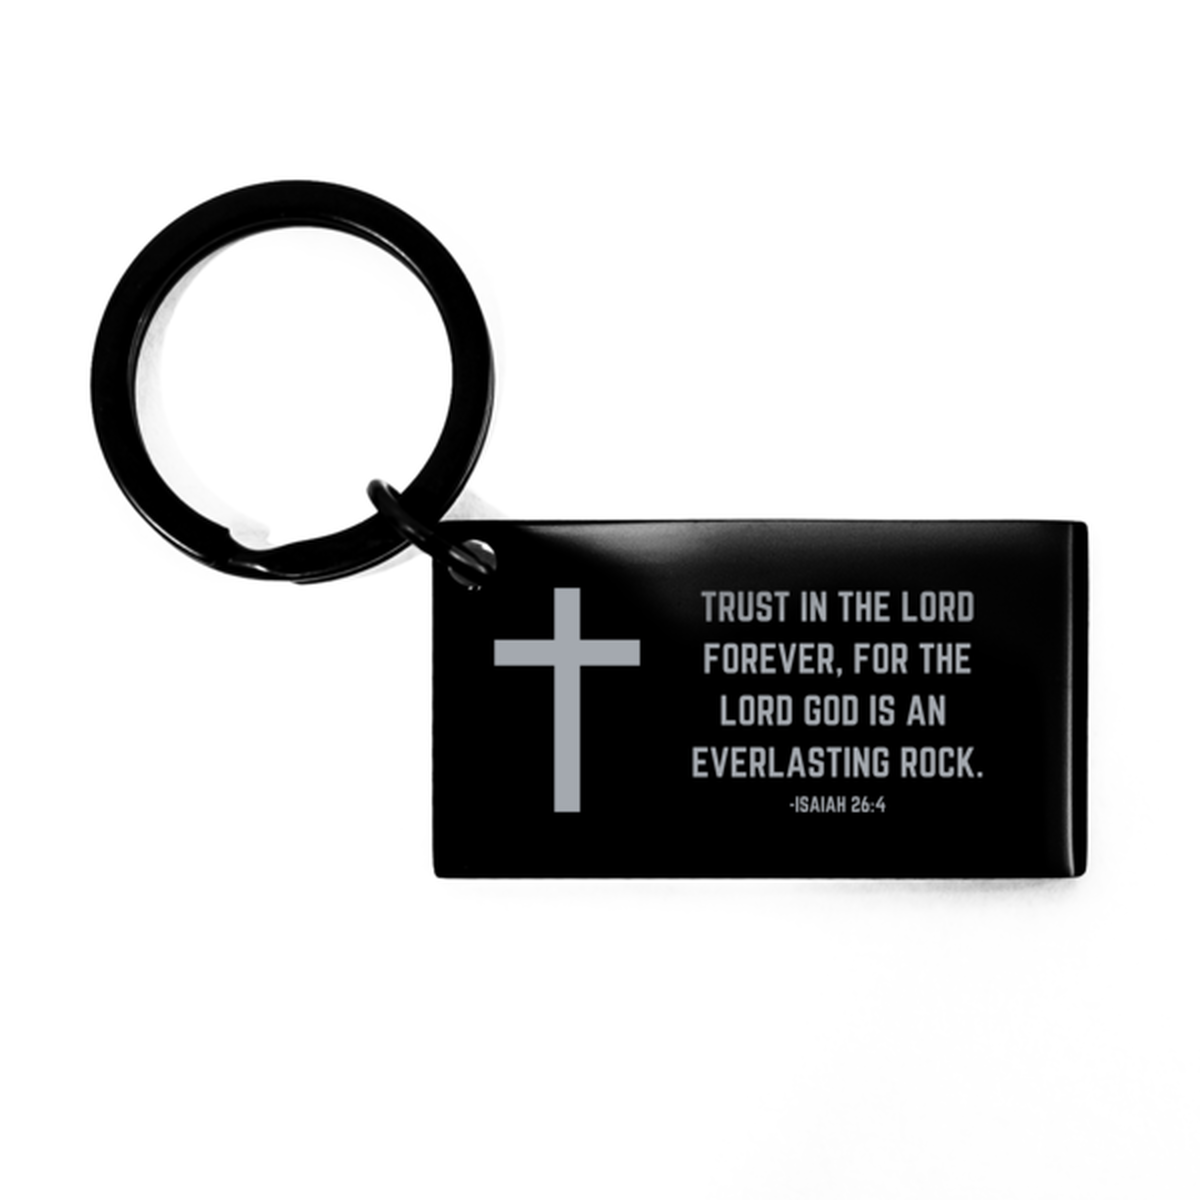 Baptism Gifts For Teenage Boys Girls, Christian Bible Verse Black Keychain, Trust in the Lord forever, Confirmation Gifts, Bible Verse Keyring for Son, Godson, Grandson, Nephew